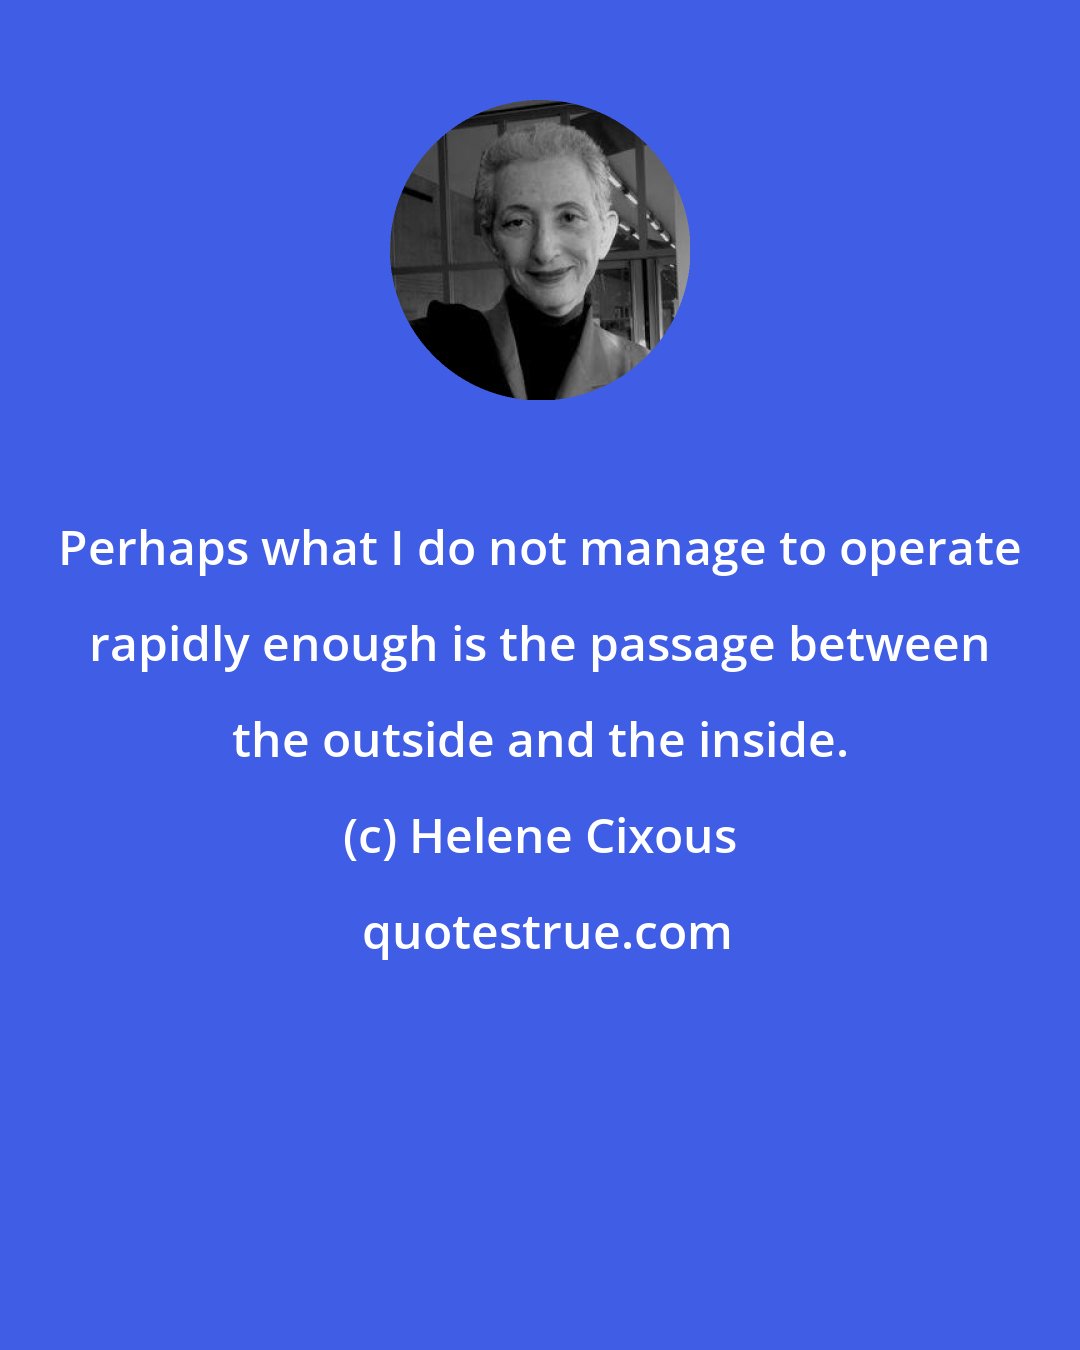 Helene Cixous: Perhaps what I do not manage to operate rapidly enough is the passage between the outside and the inside.